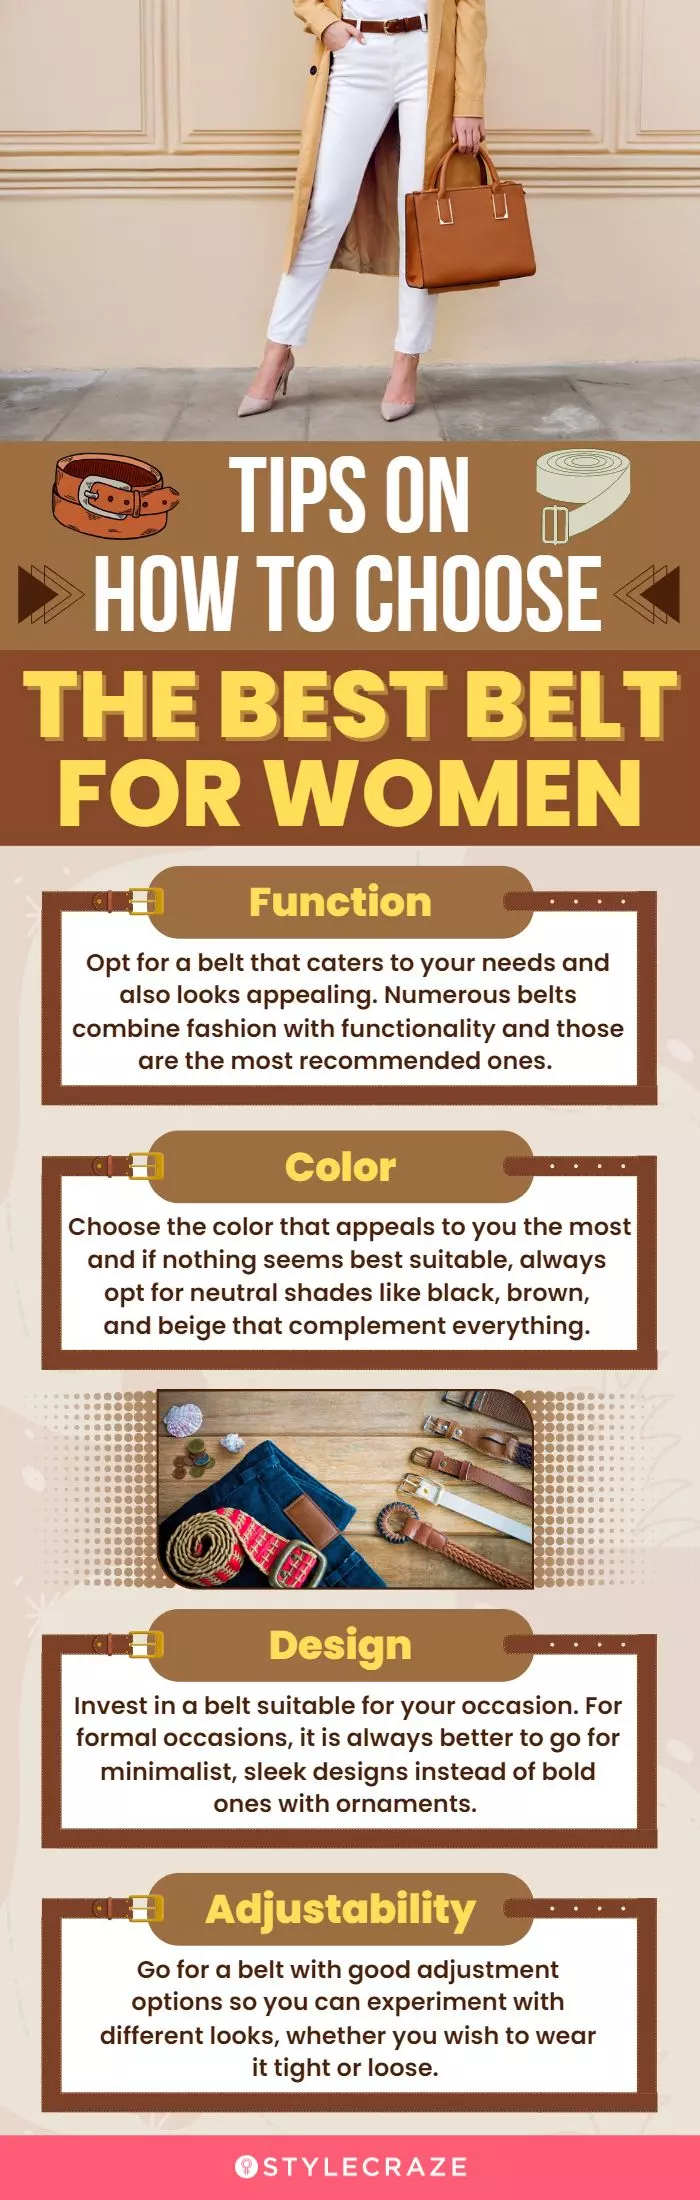 Tips On How To Choose The Best Belt For Women (infographic)